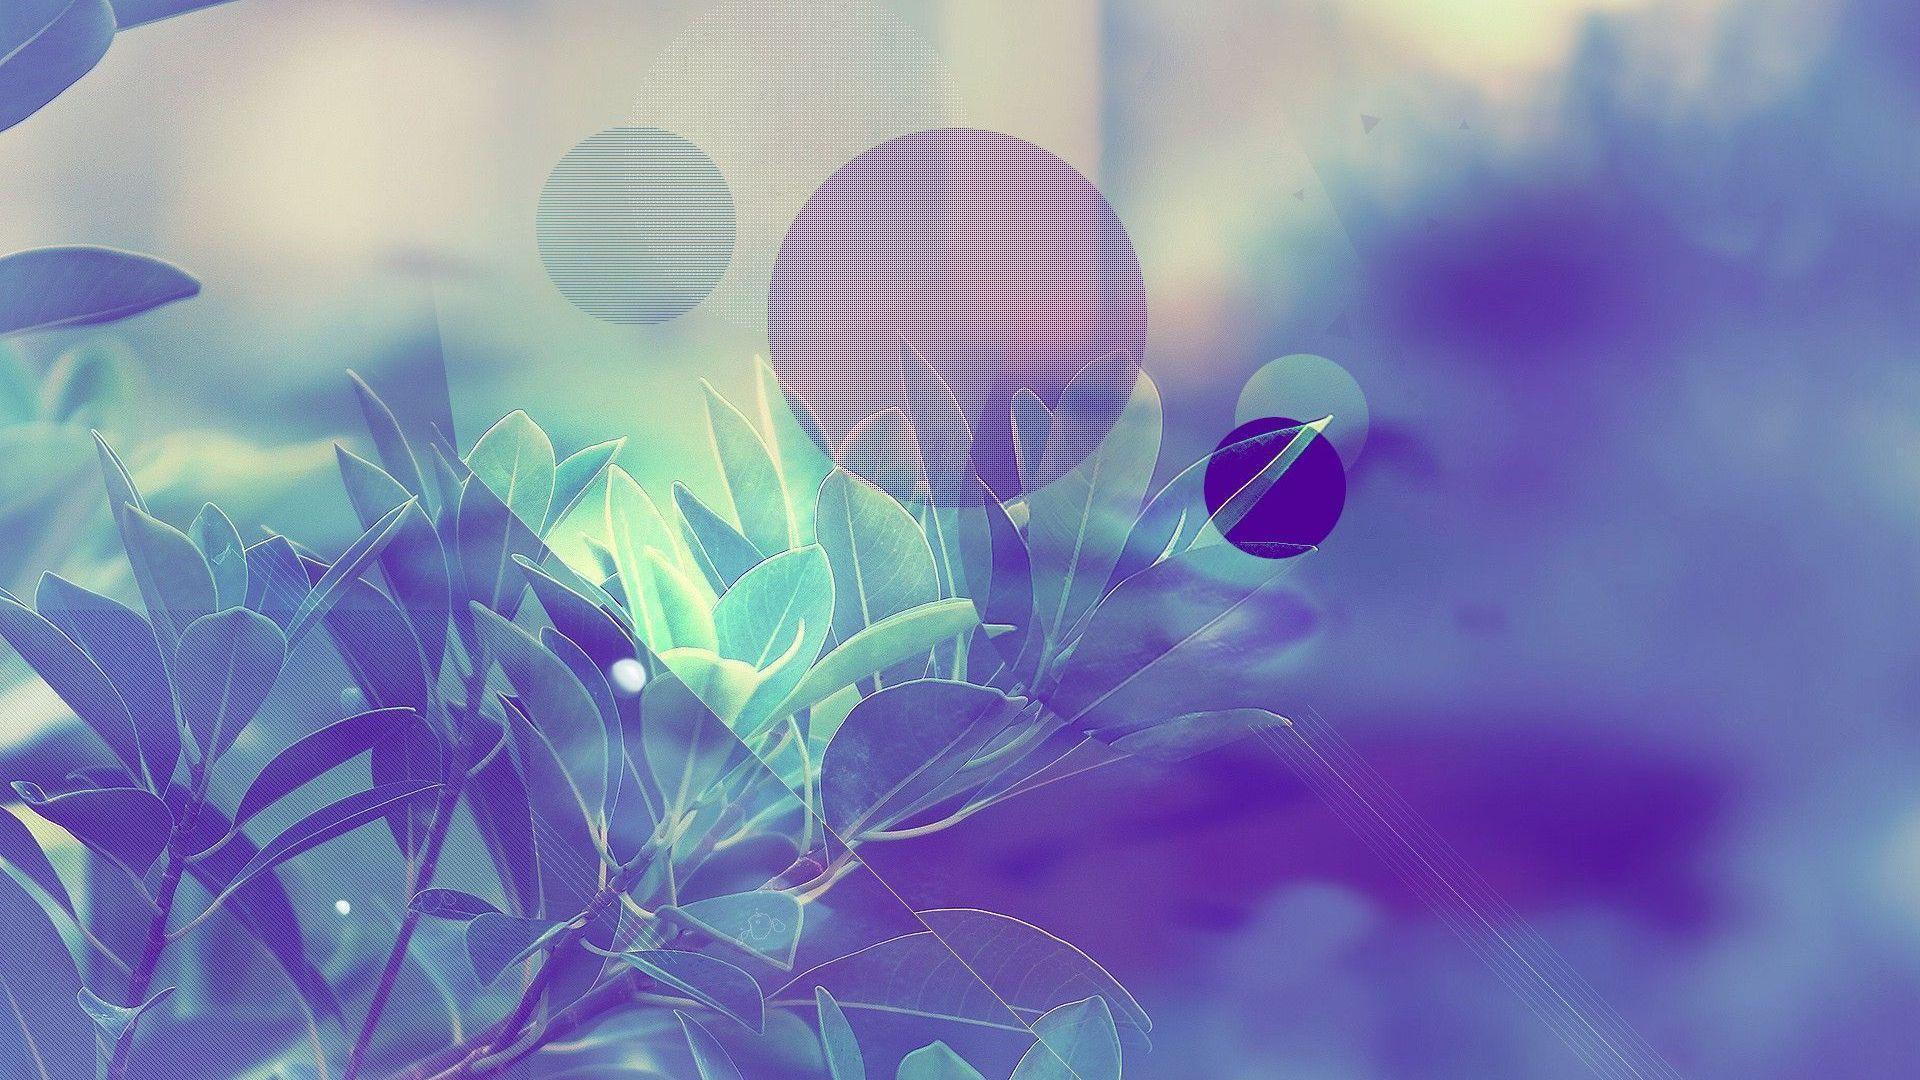 Pastel filter over the plant Wallpaper #